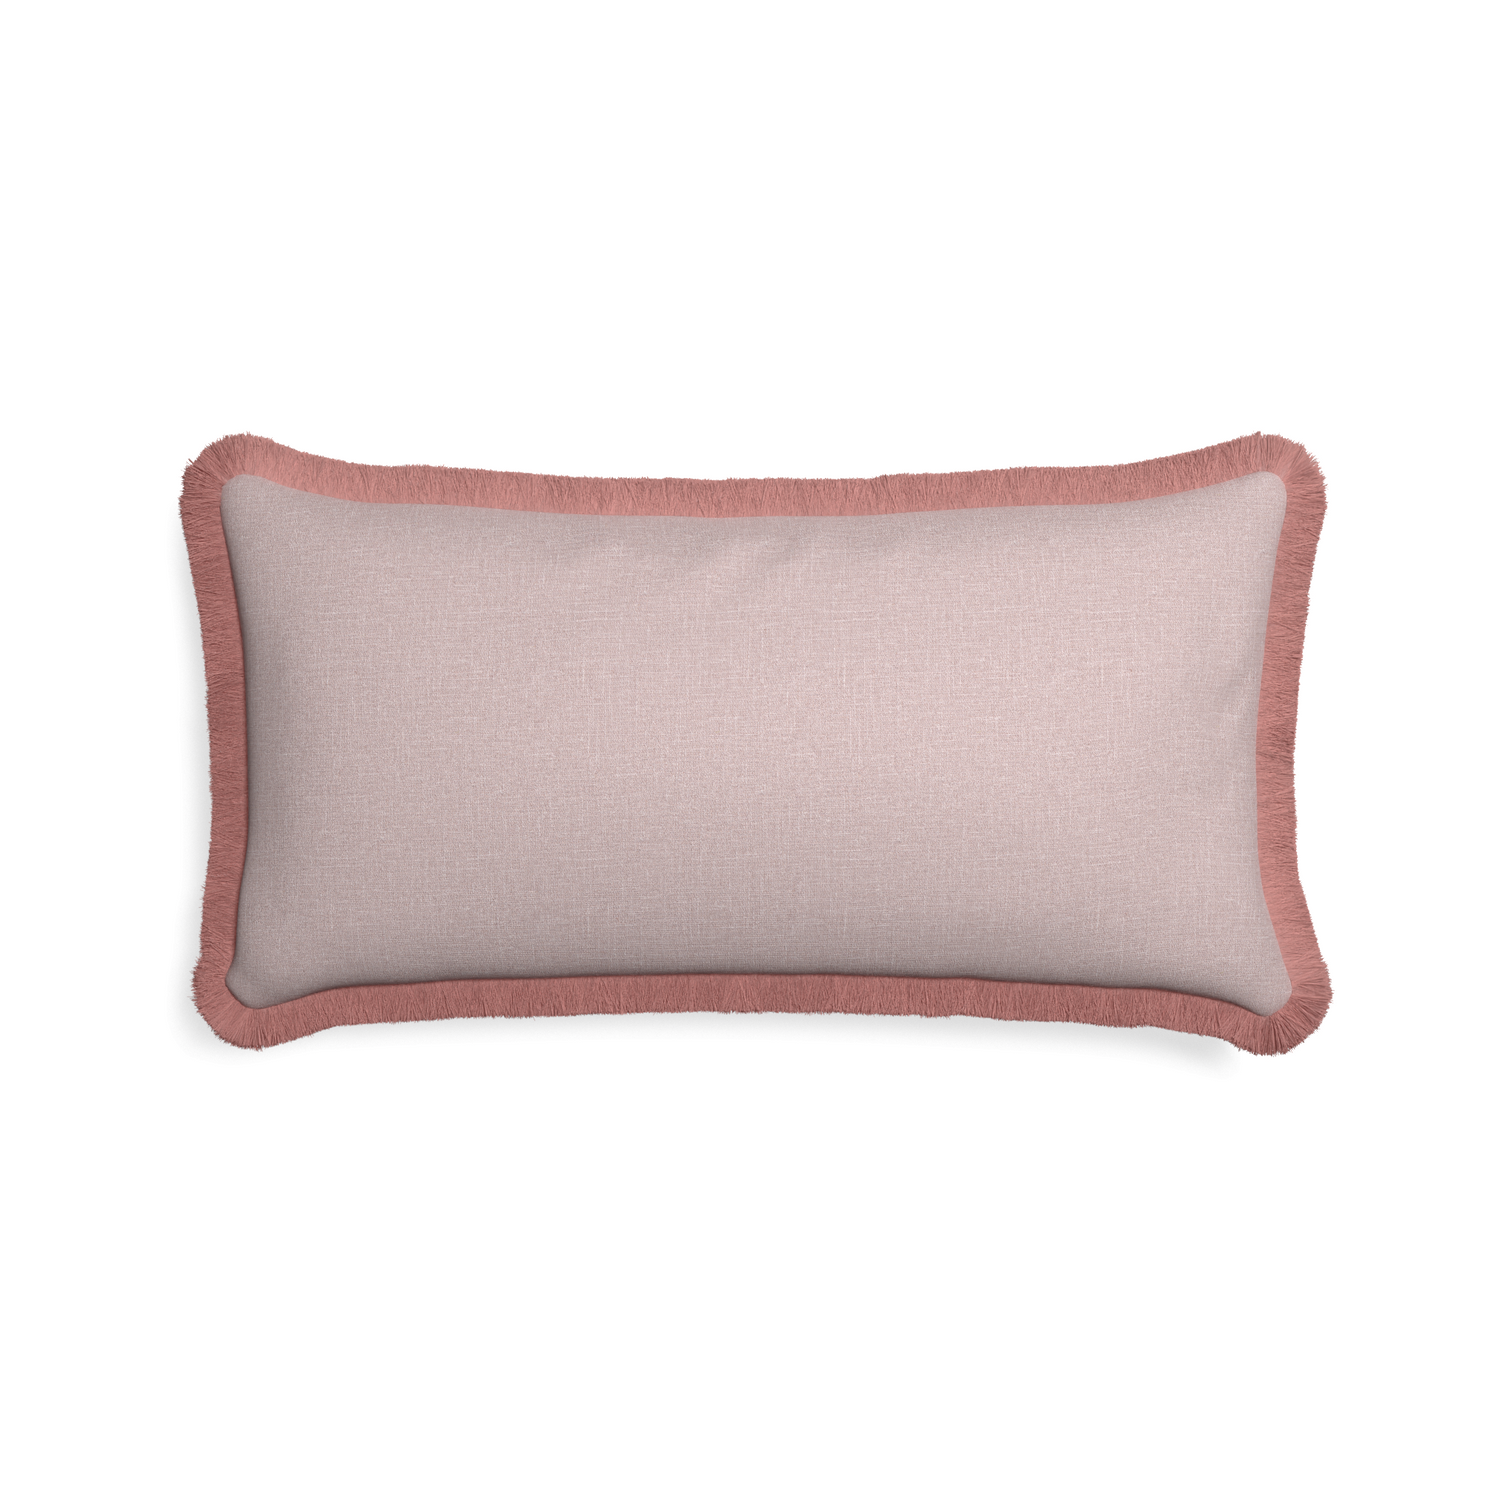 Midi-lumbar orchid custom mauve pinkpillow with d fringe on white background